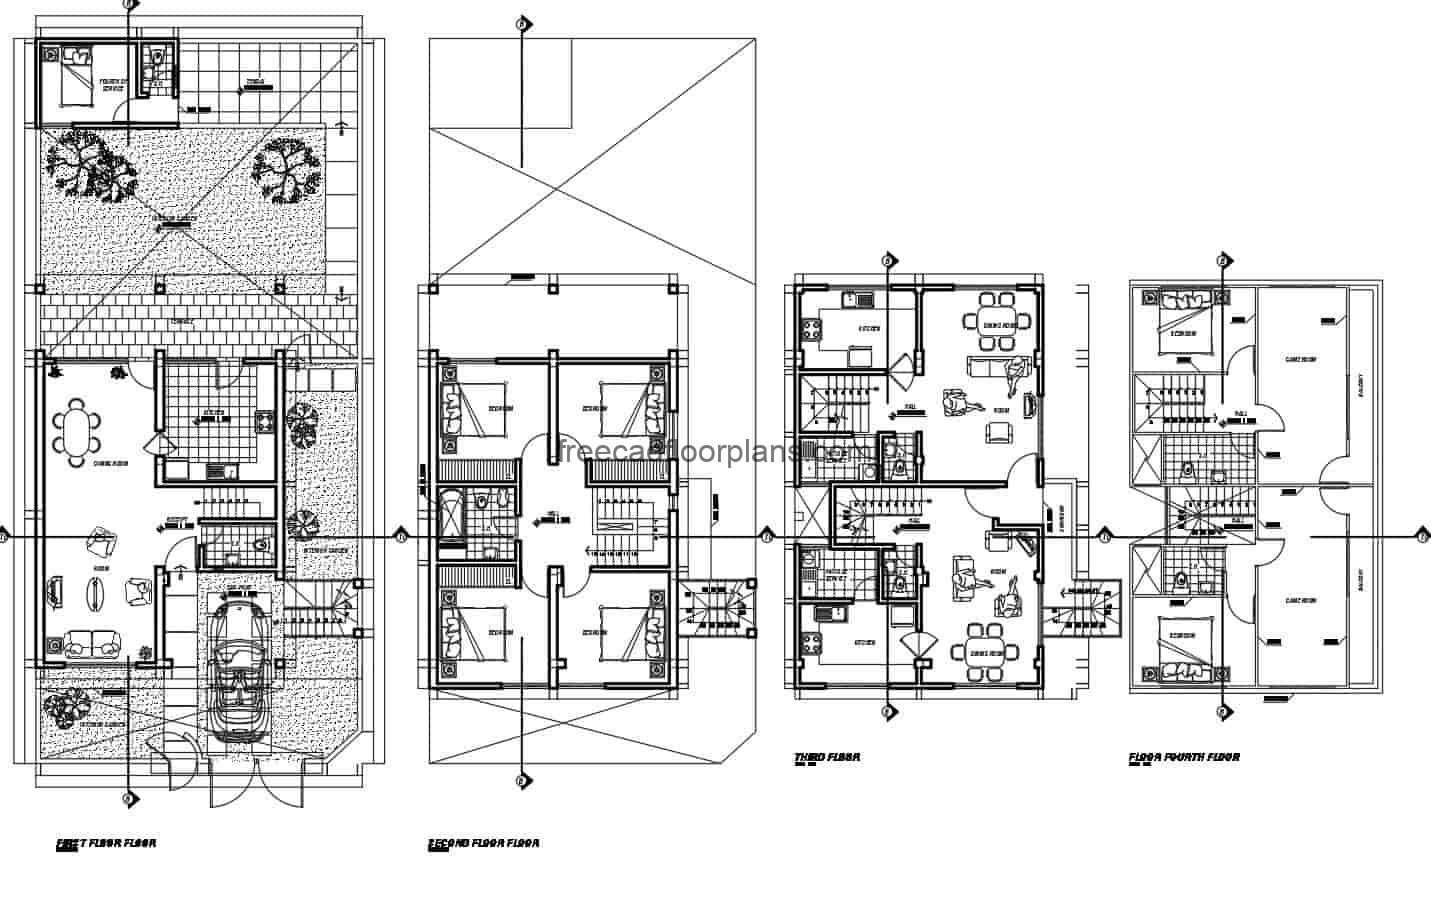 Family residence of four levels with six rooms in total, complete project in Autocad DWG format, first level garage for one vehicle, living room, half bath, kitchen, dining area, interior garden and service area. Second level with four rooms with shared bathroom, third and fourth level another independent residence with living room, kitchen, dining room, with two bedrooms and game rooms. 2D CAD plans for free download in DWG format